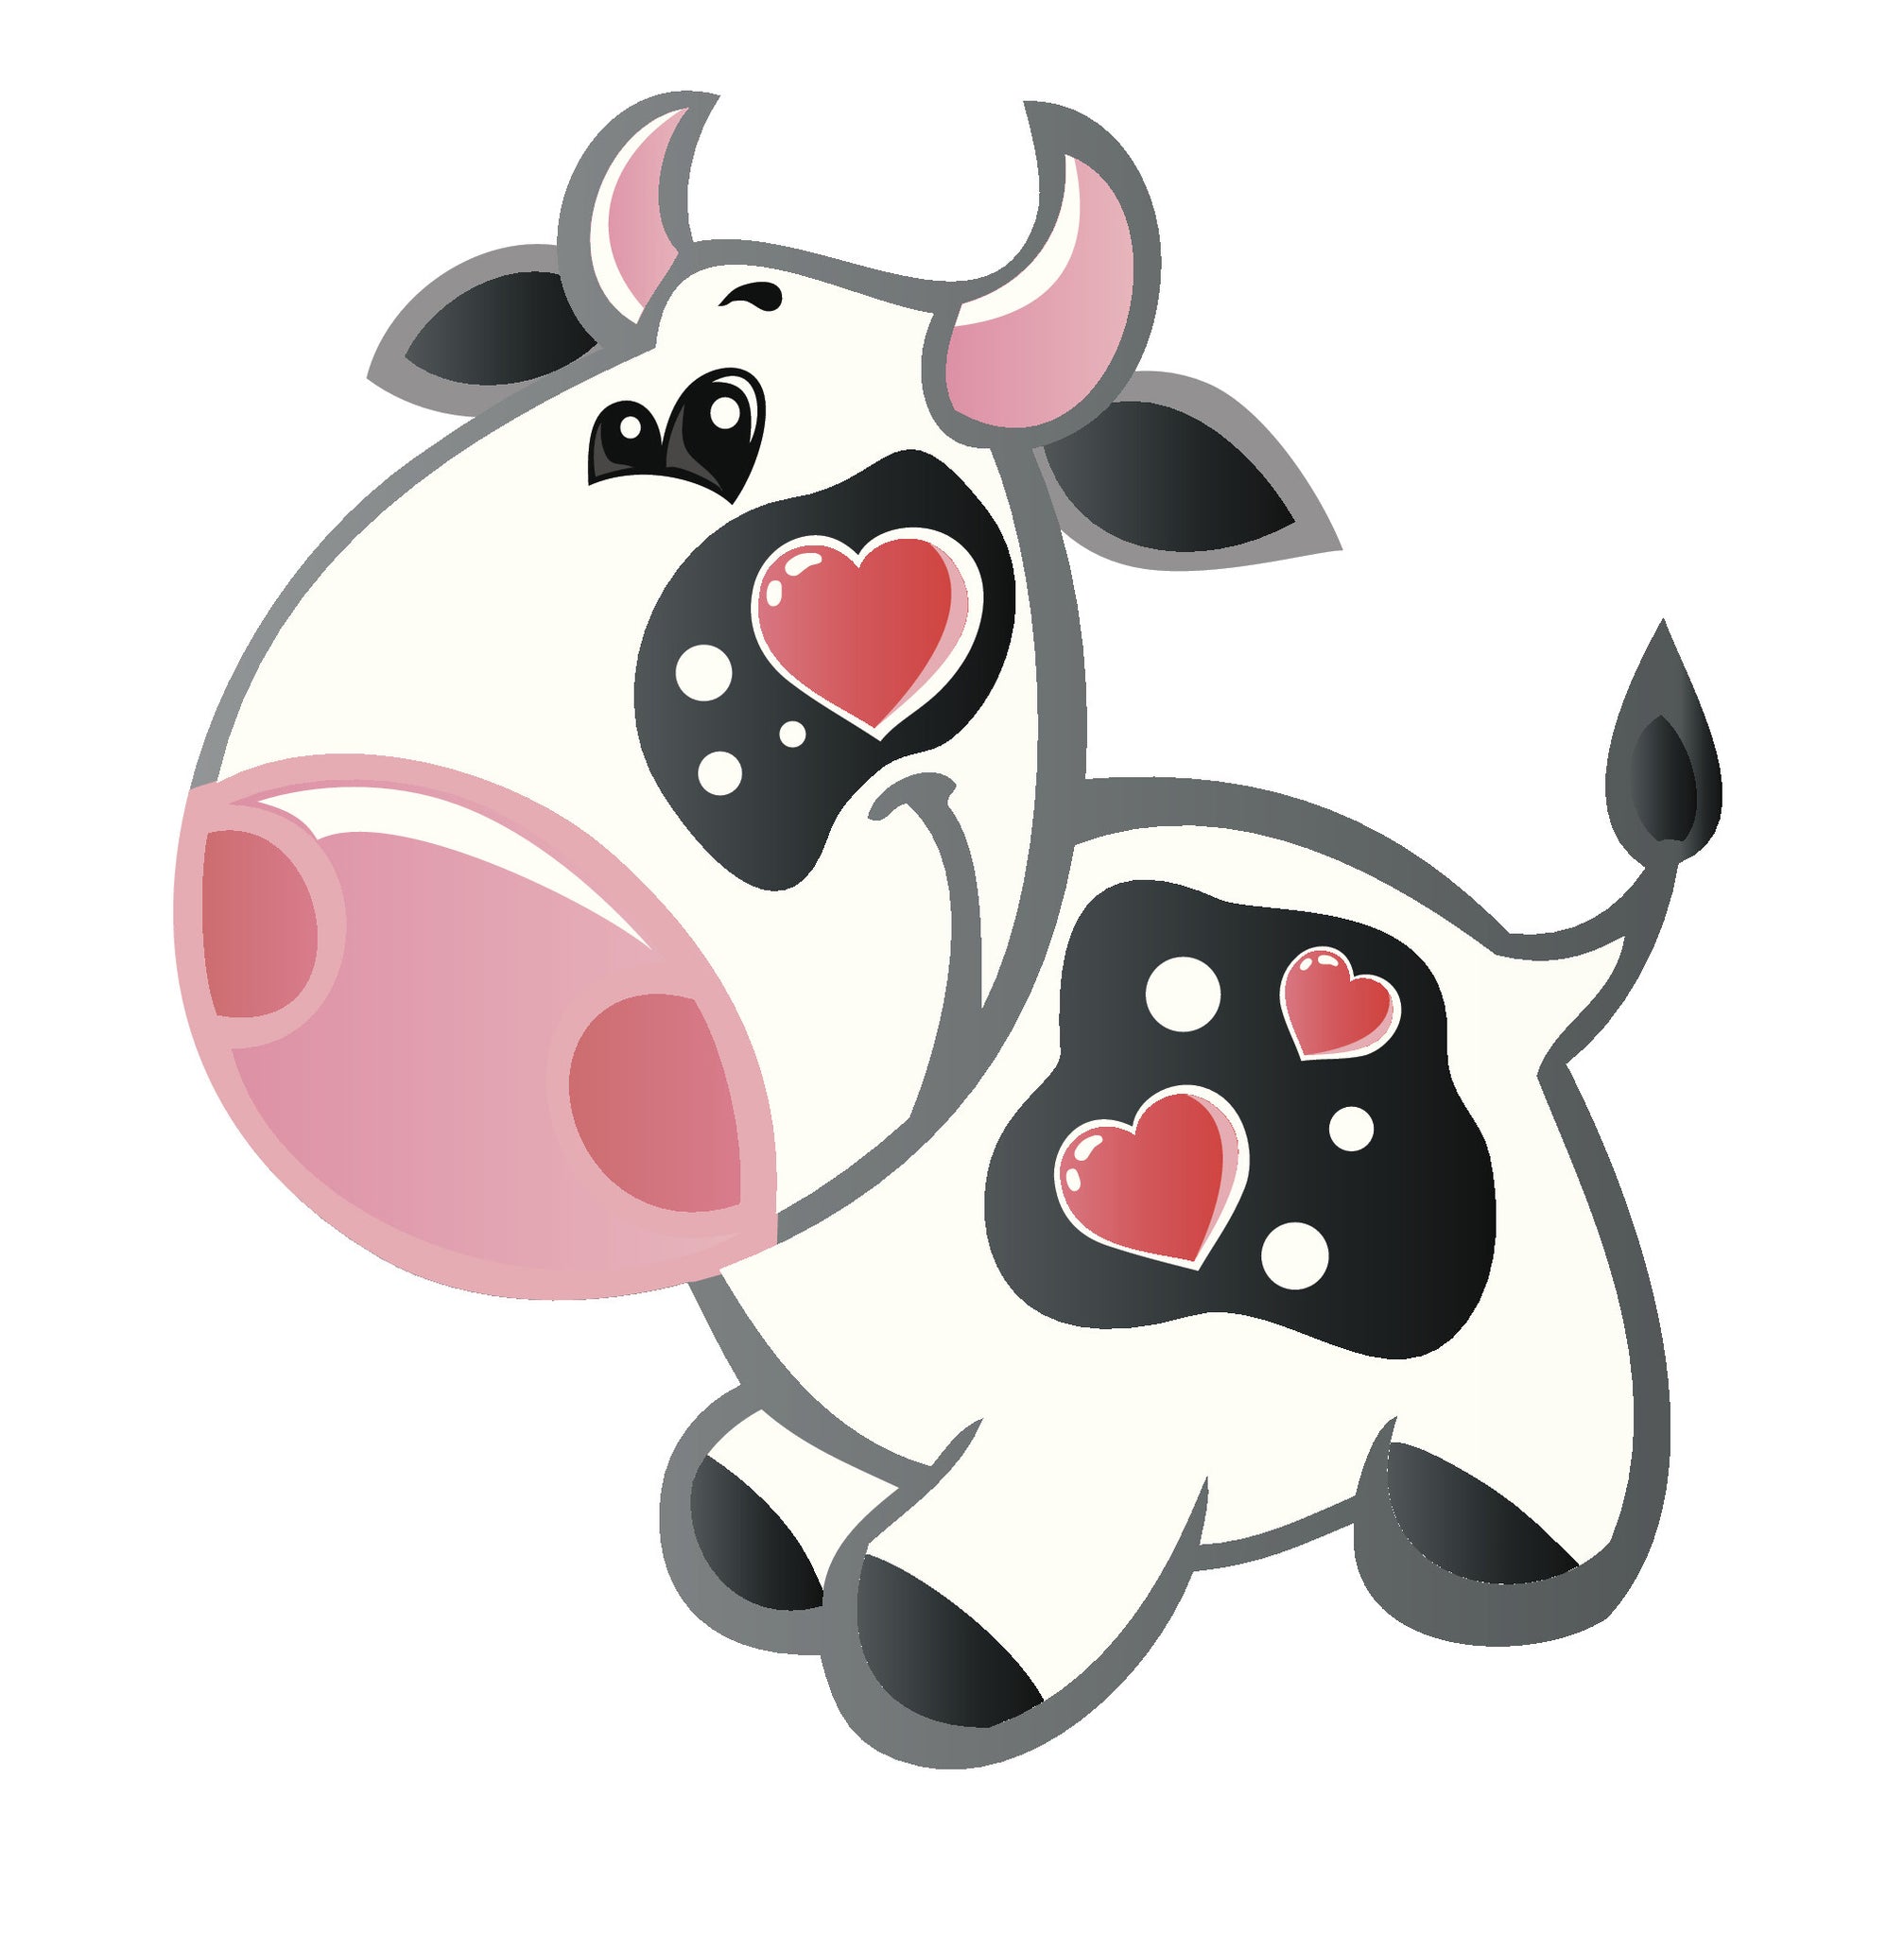 Adorable Baby Cow Calf with Hearts Vinyl Decal Sticker